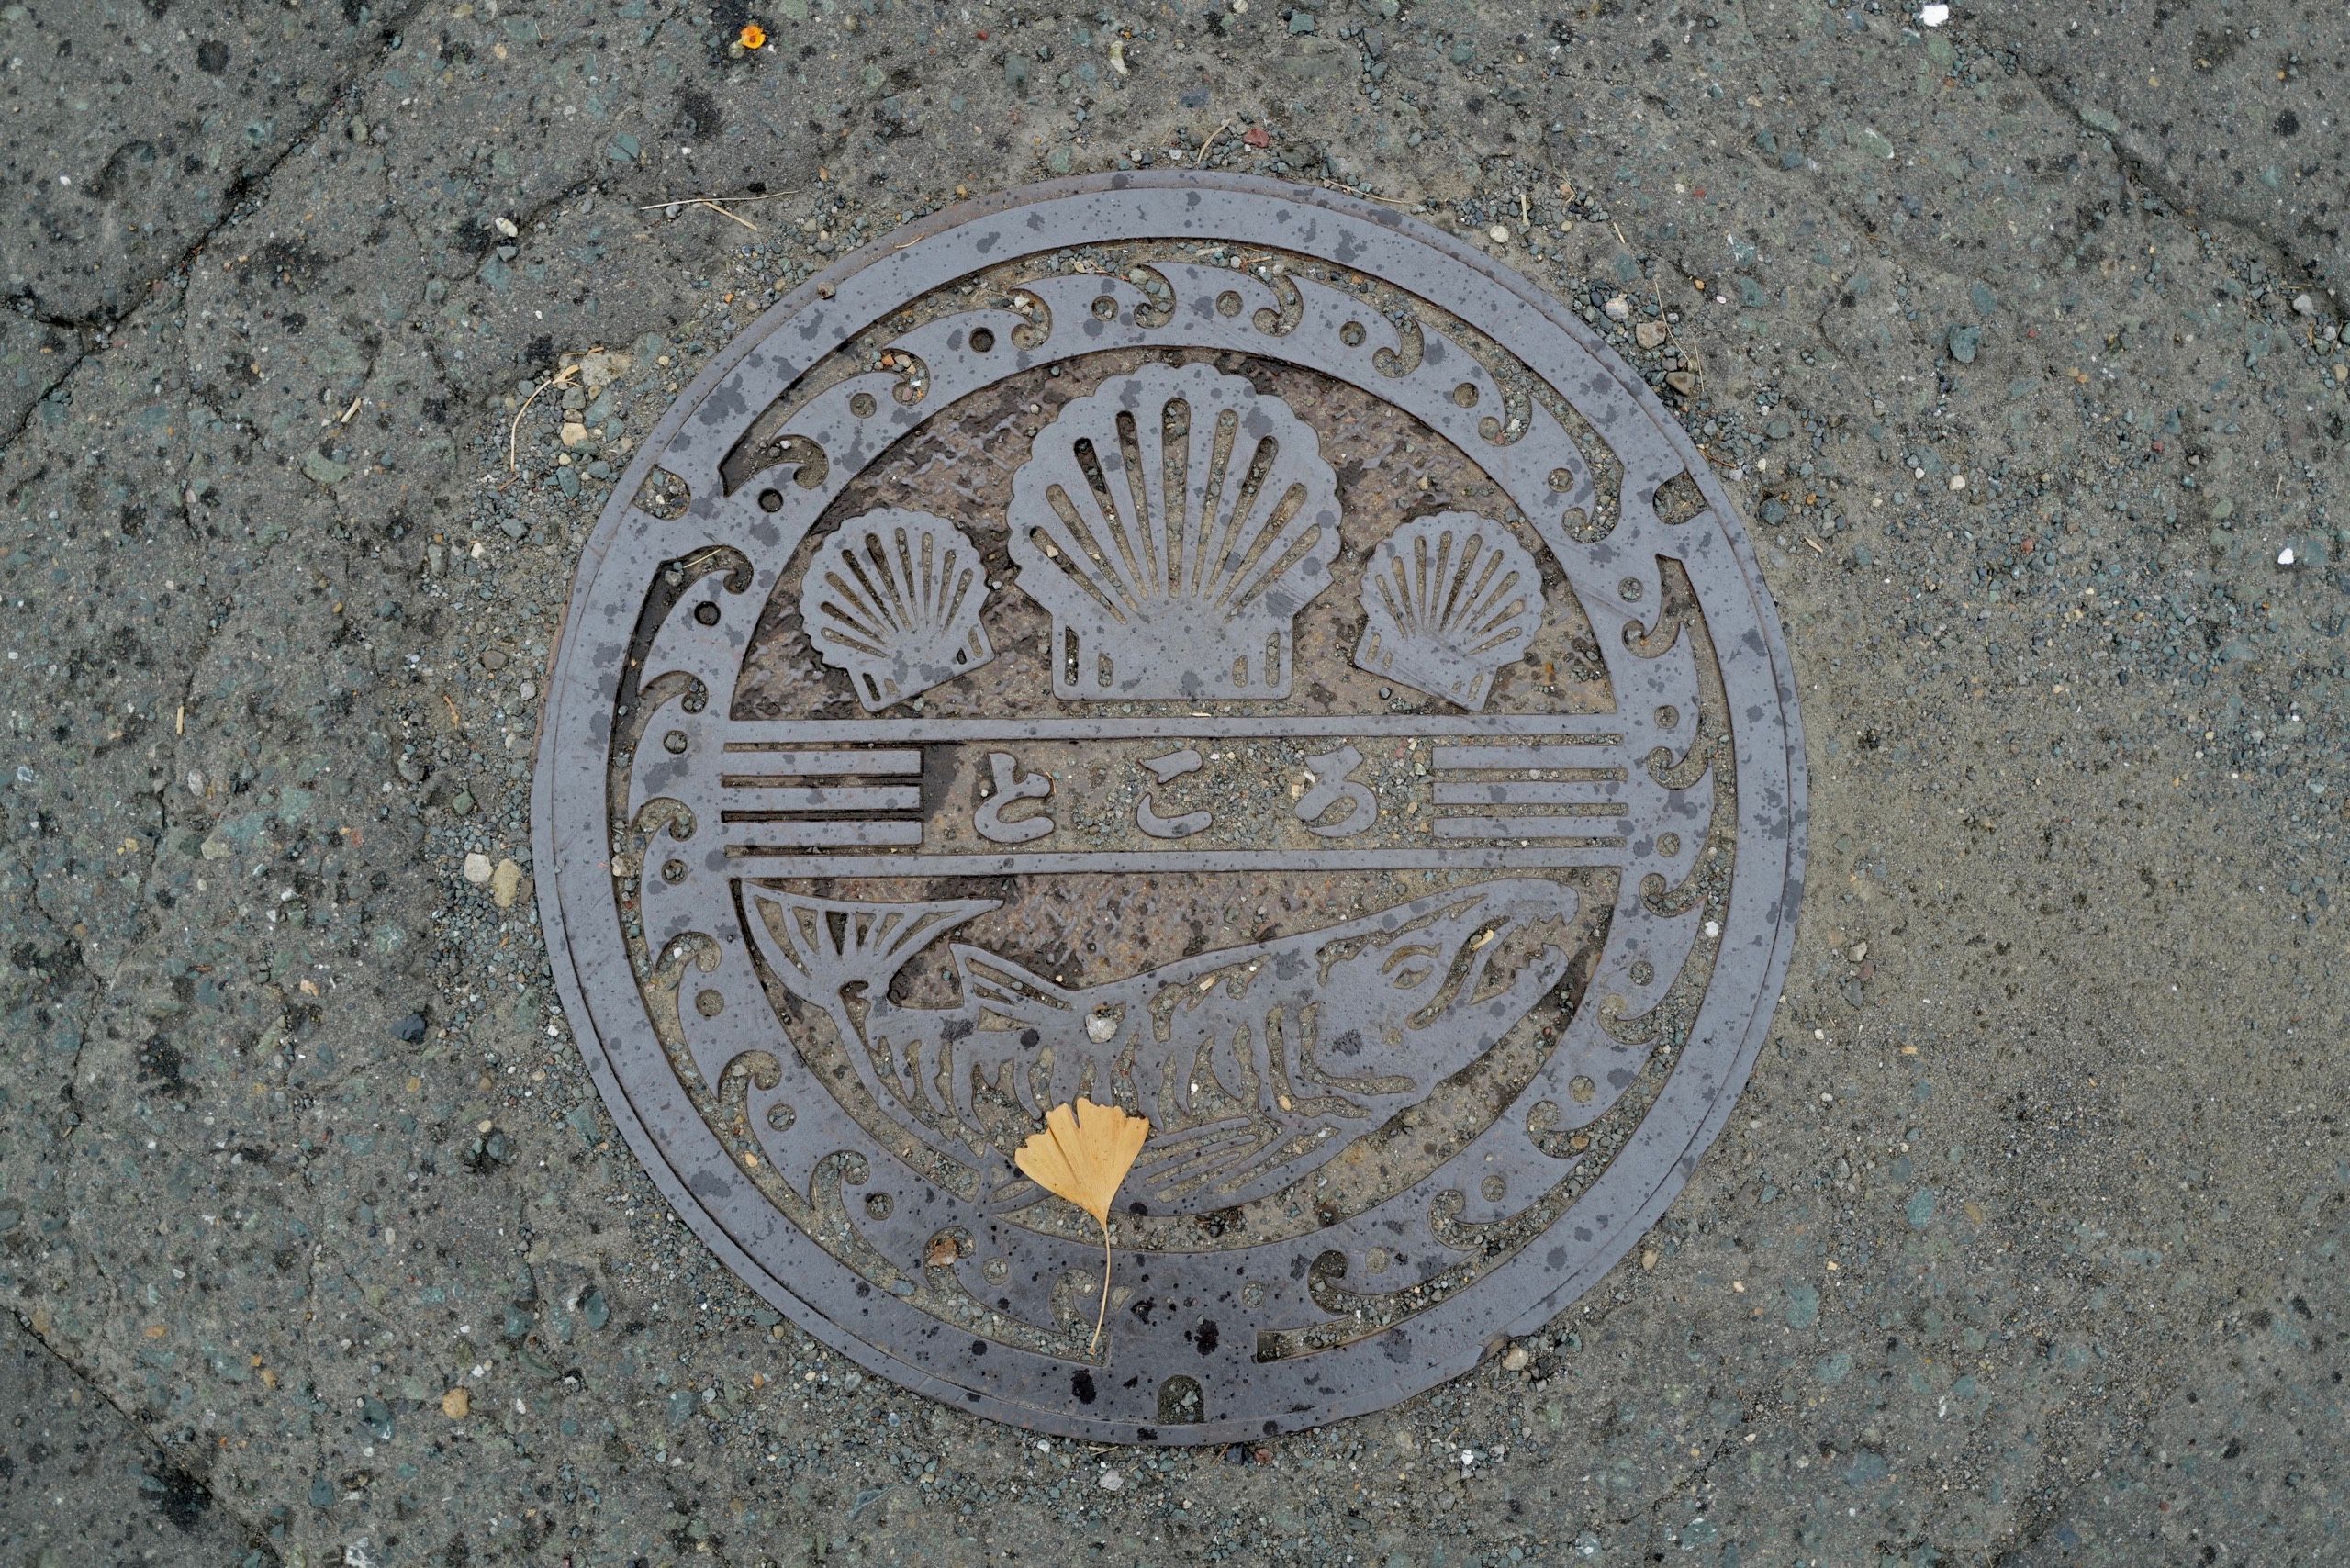 A manhole cover shows scallops and a salmon, and there’s a single yellow ginkgo leaf on it